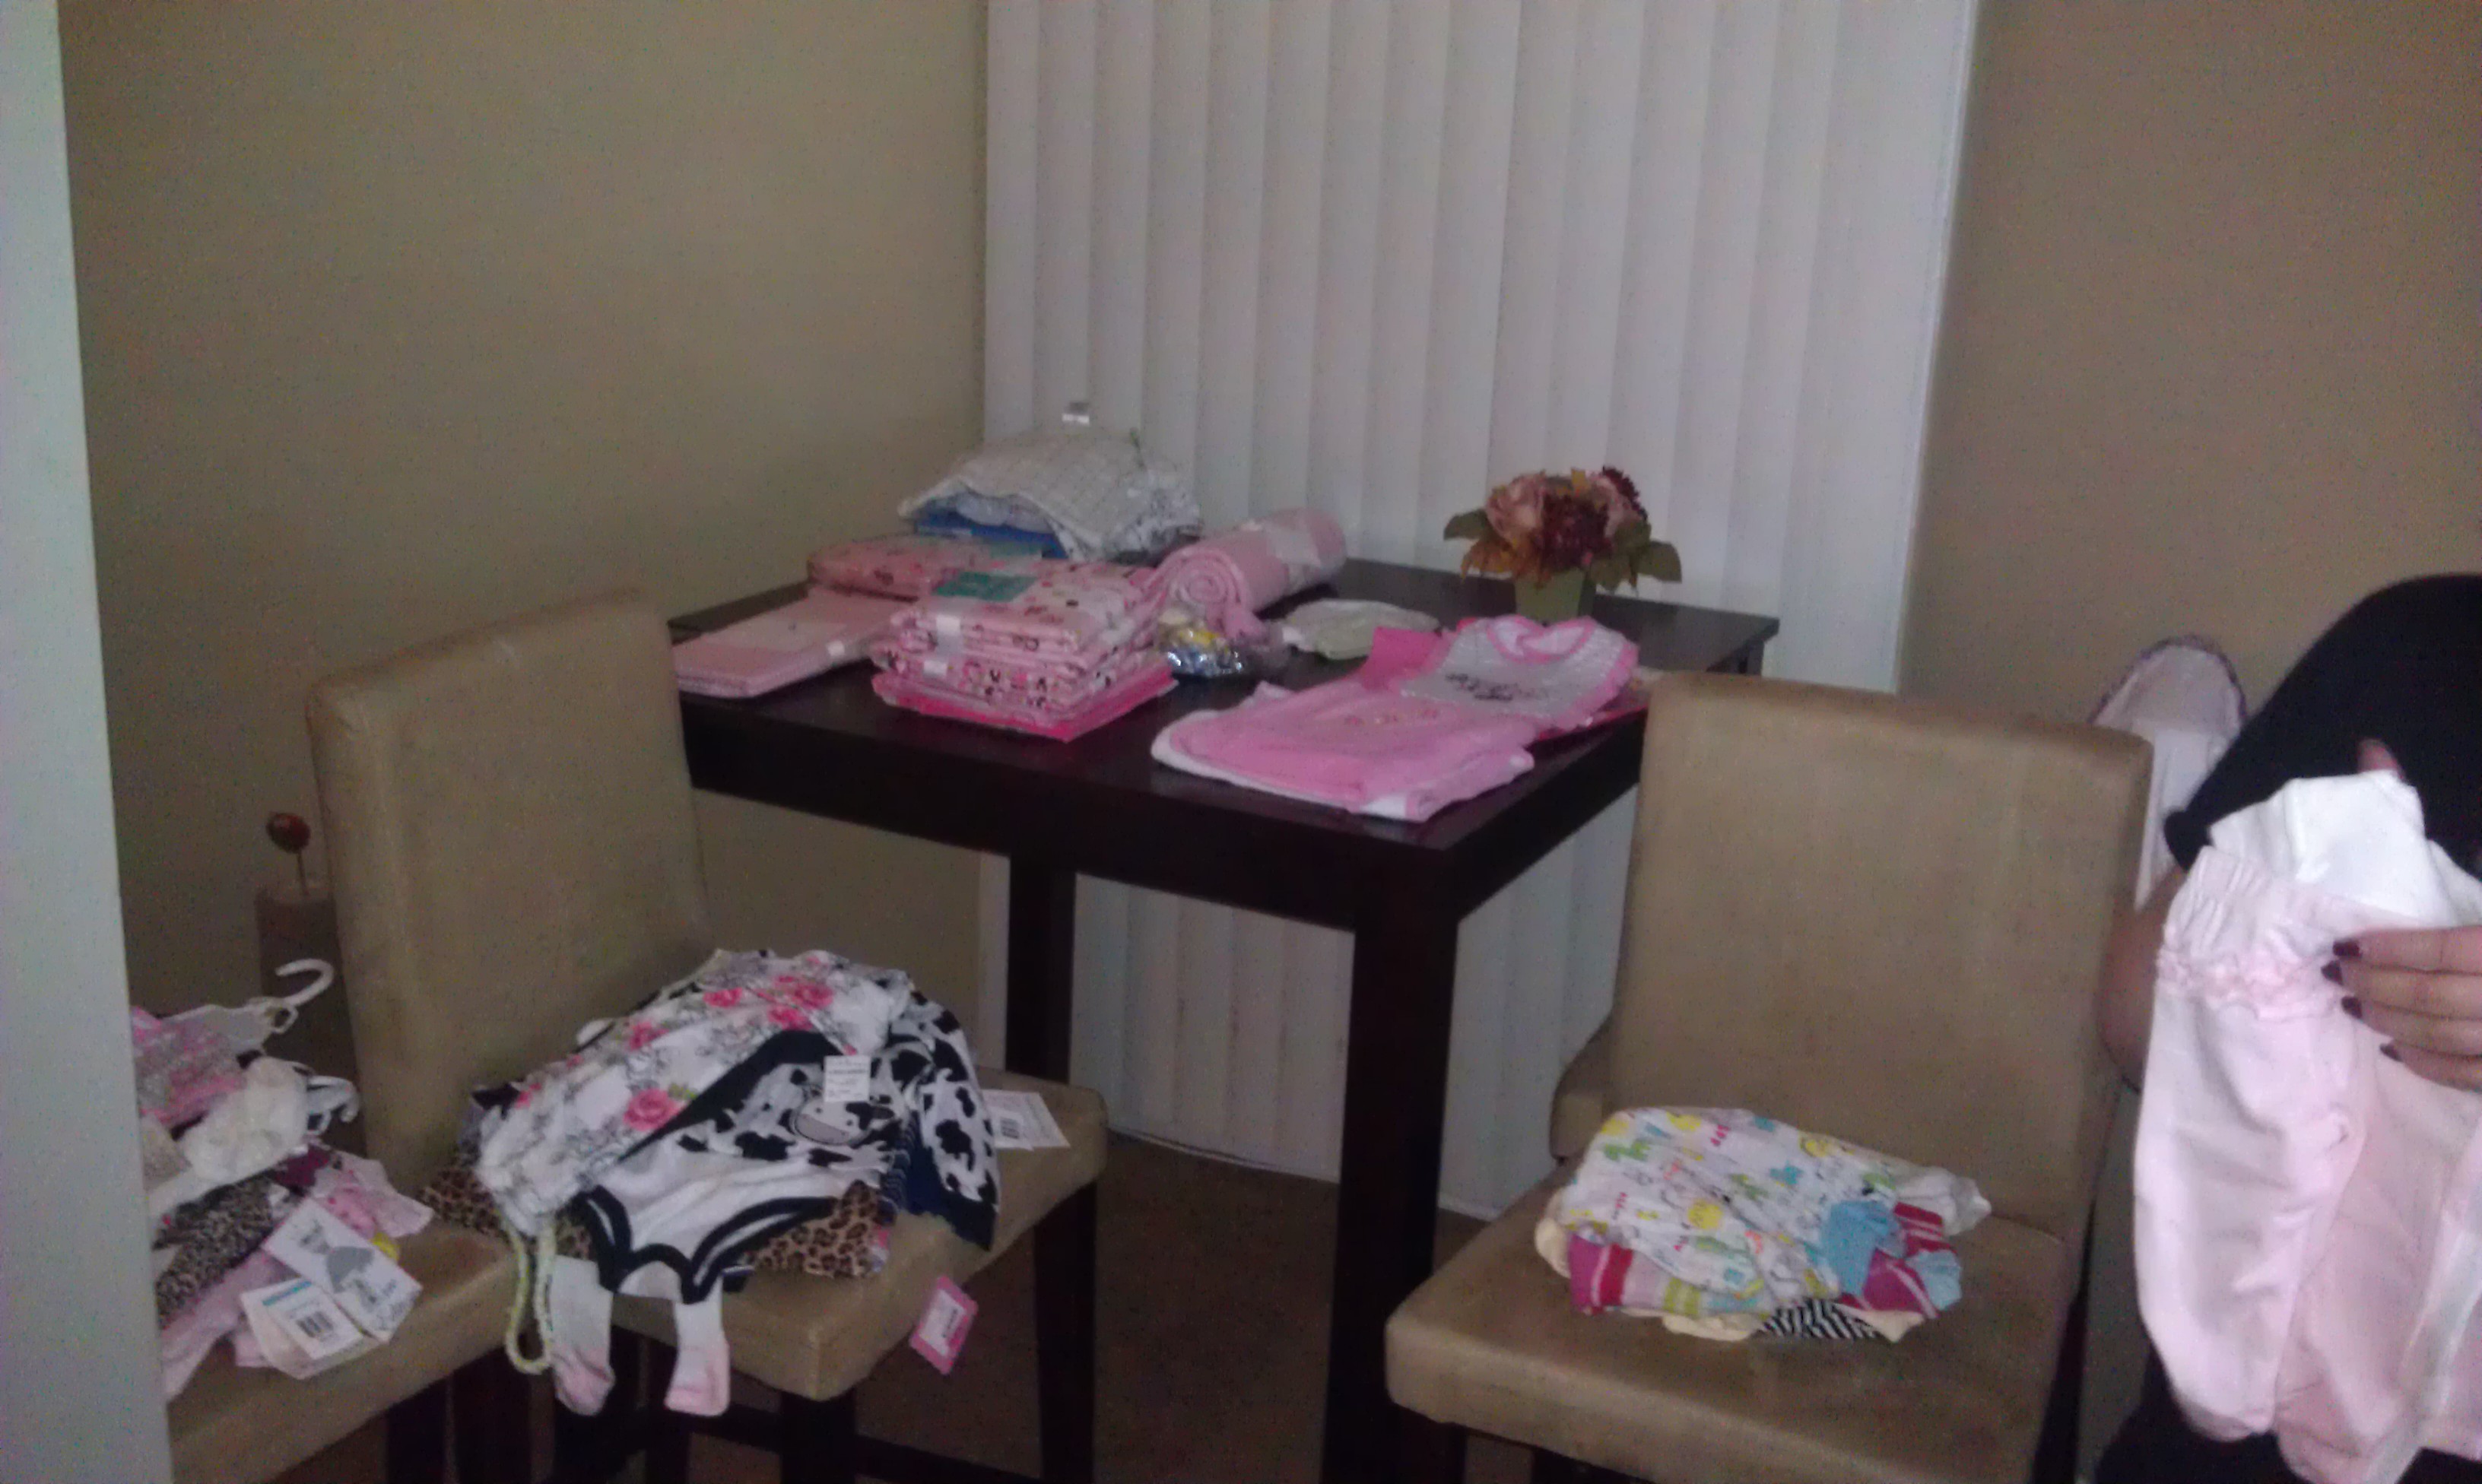 folding baby clothes